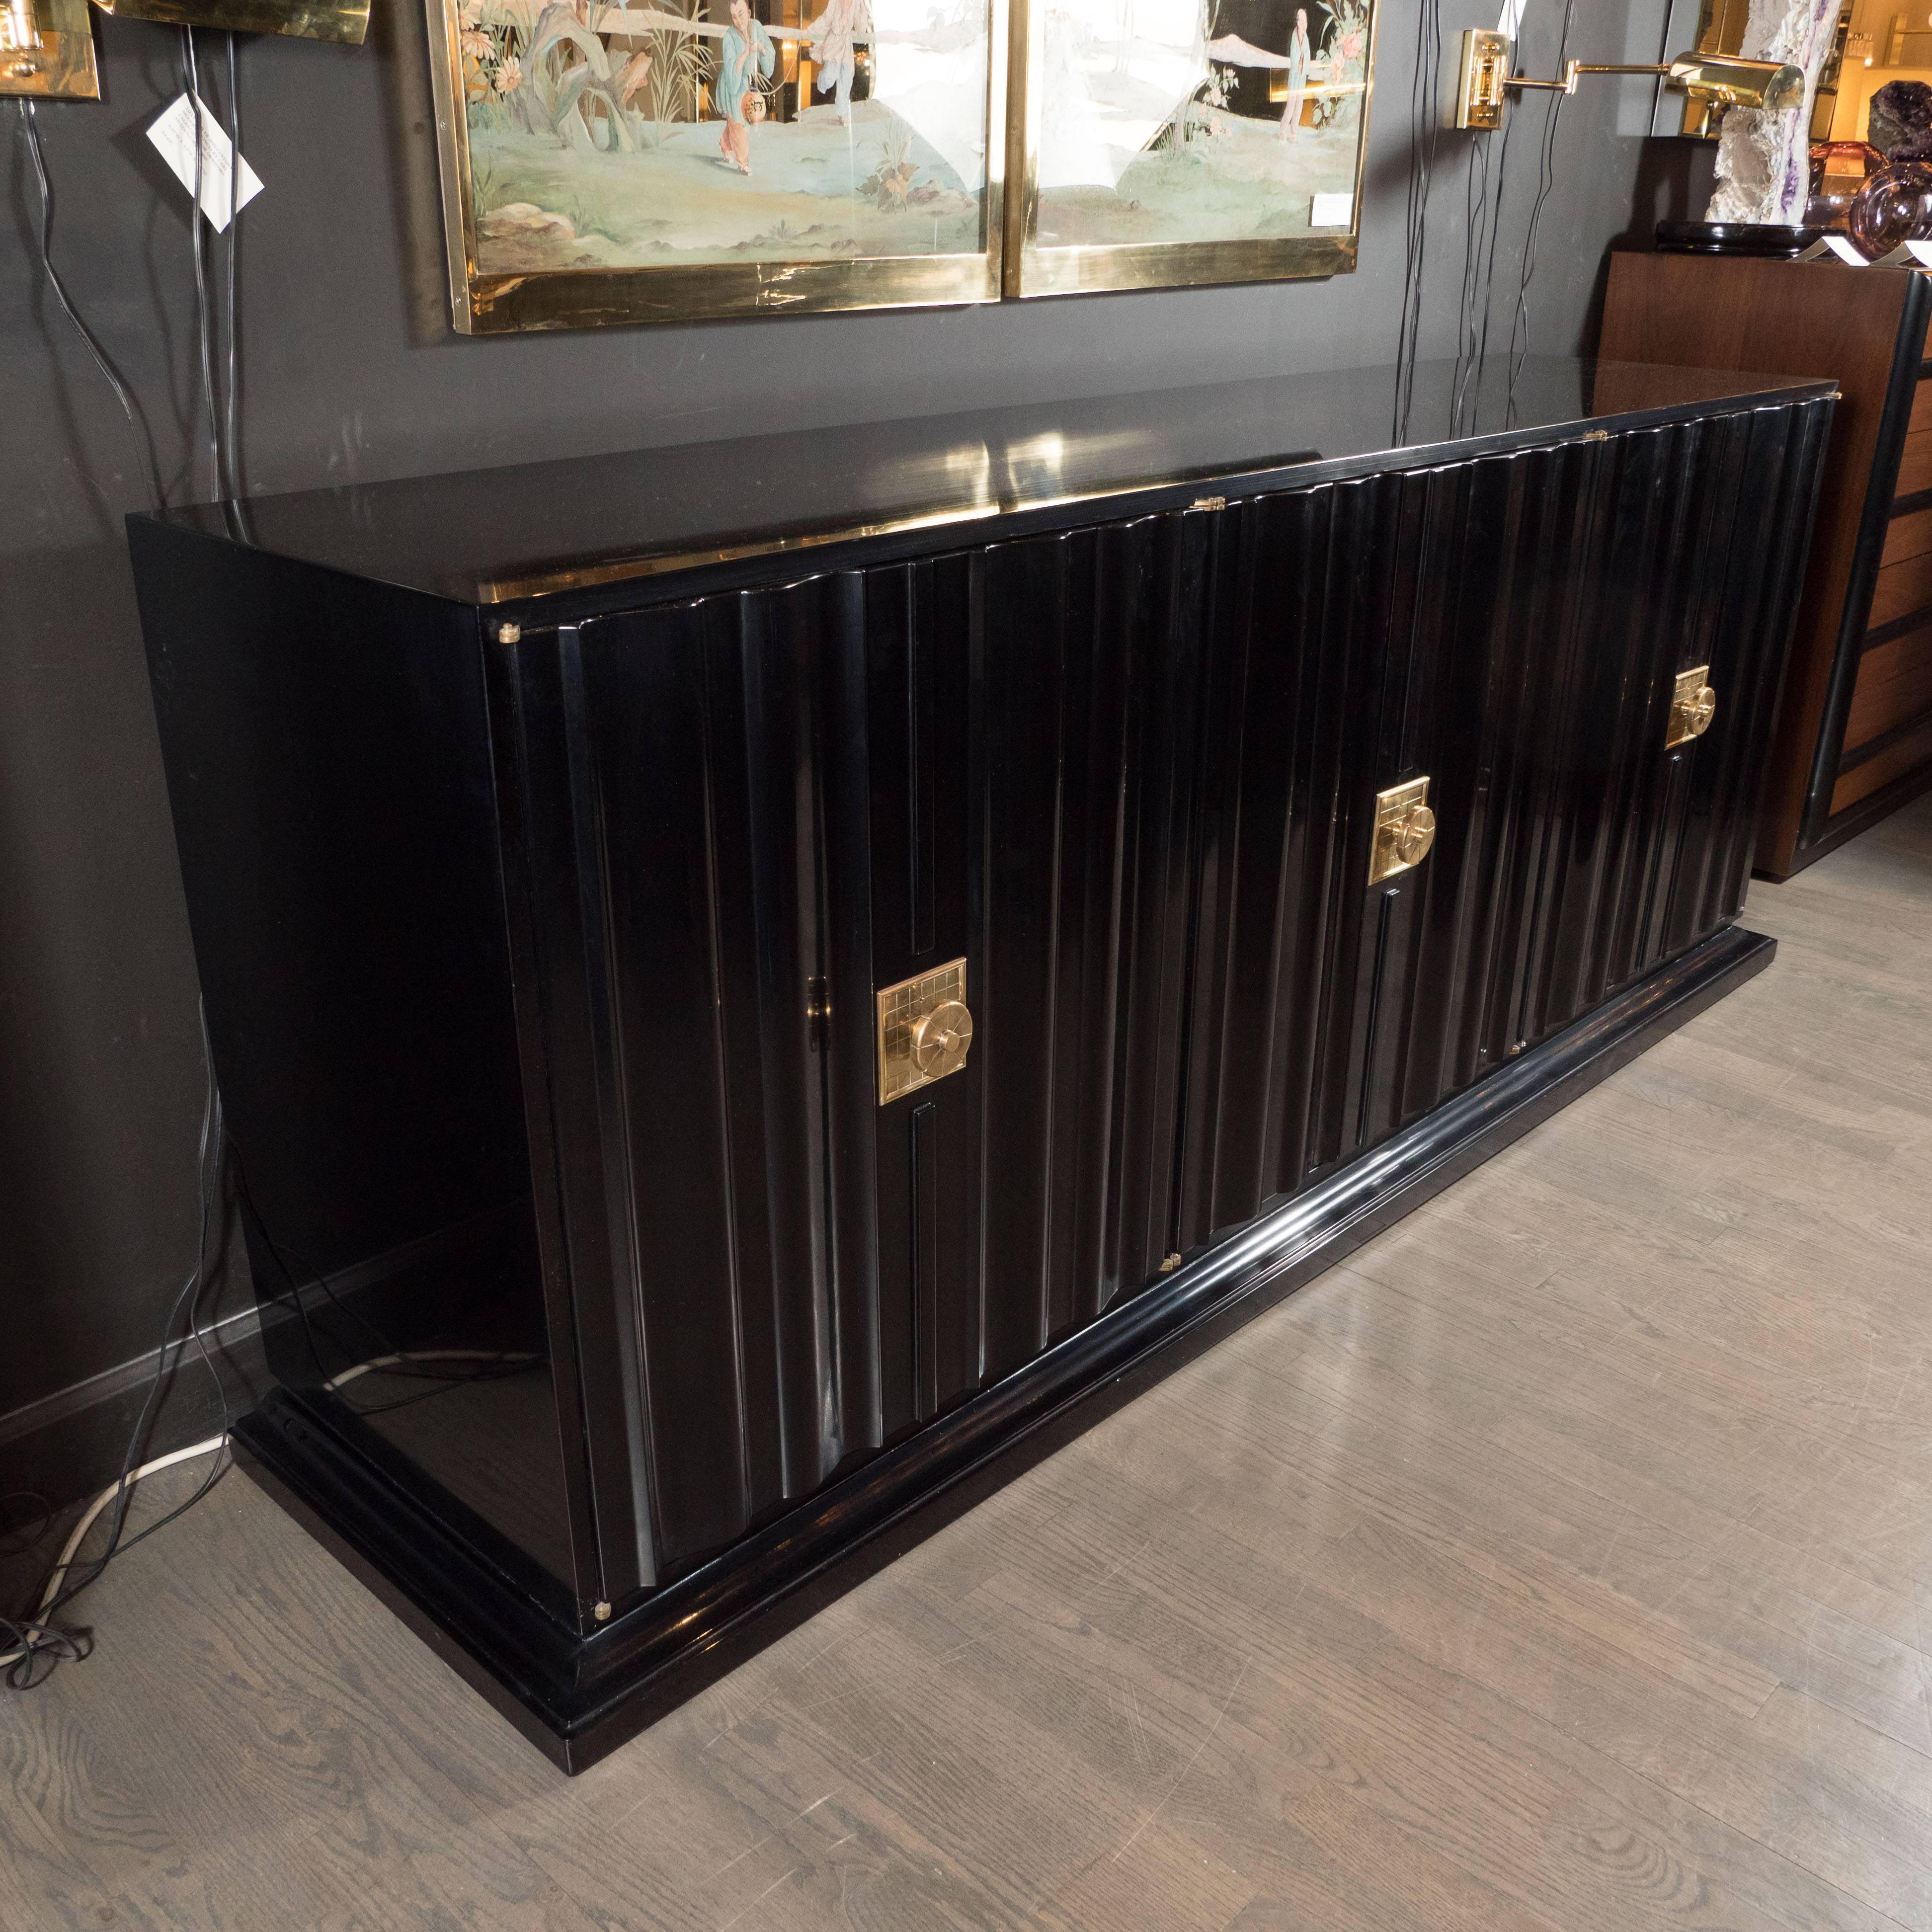 Tommi Parzinger is celebrated as one of the pioneers of high style modernism, a combination of cosmopolitan clean design and sumptuous materials. This credenza represents an important and particularly entrancing example of his practice. It features